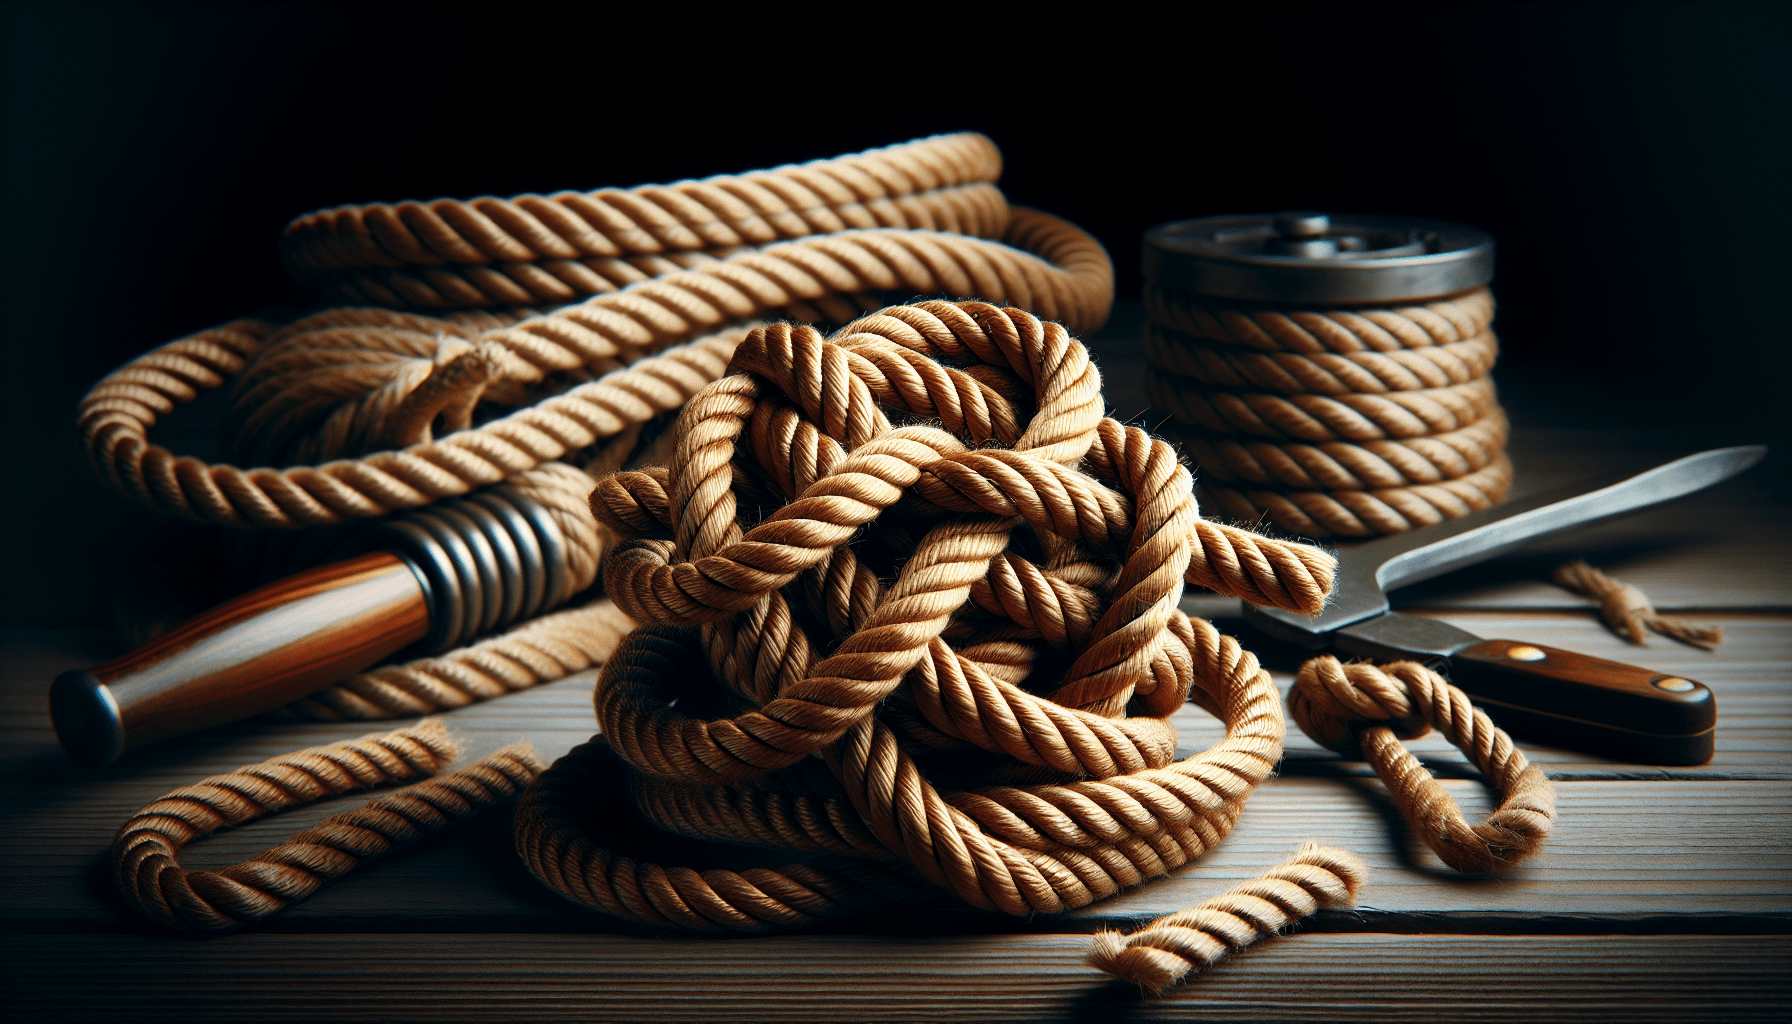 What Are The Basics Of Knot Tying And When To Use Them?